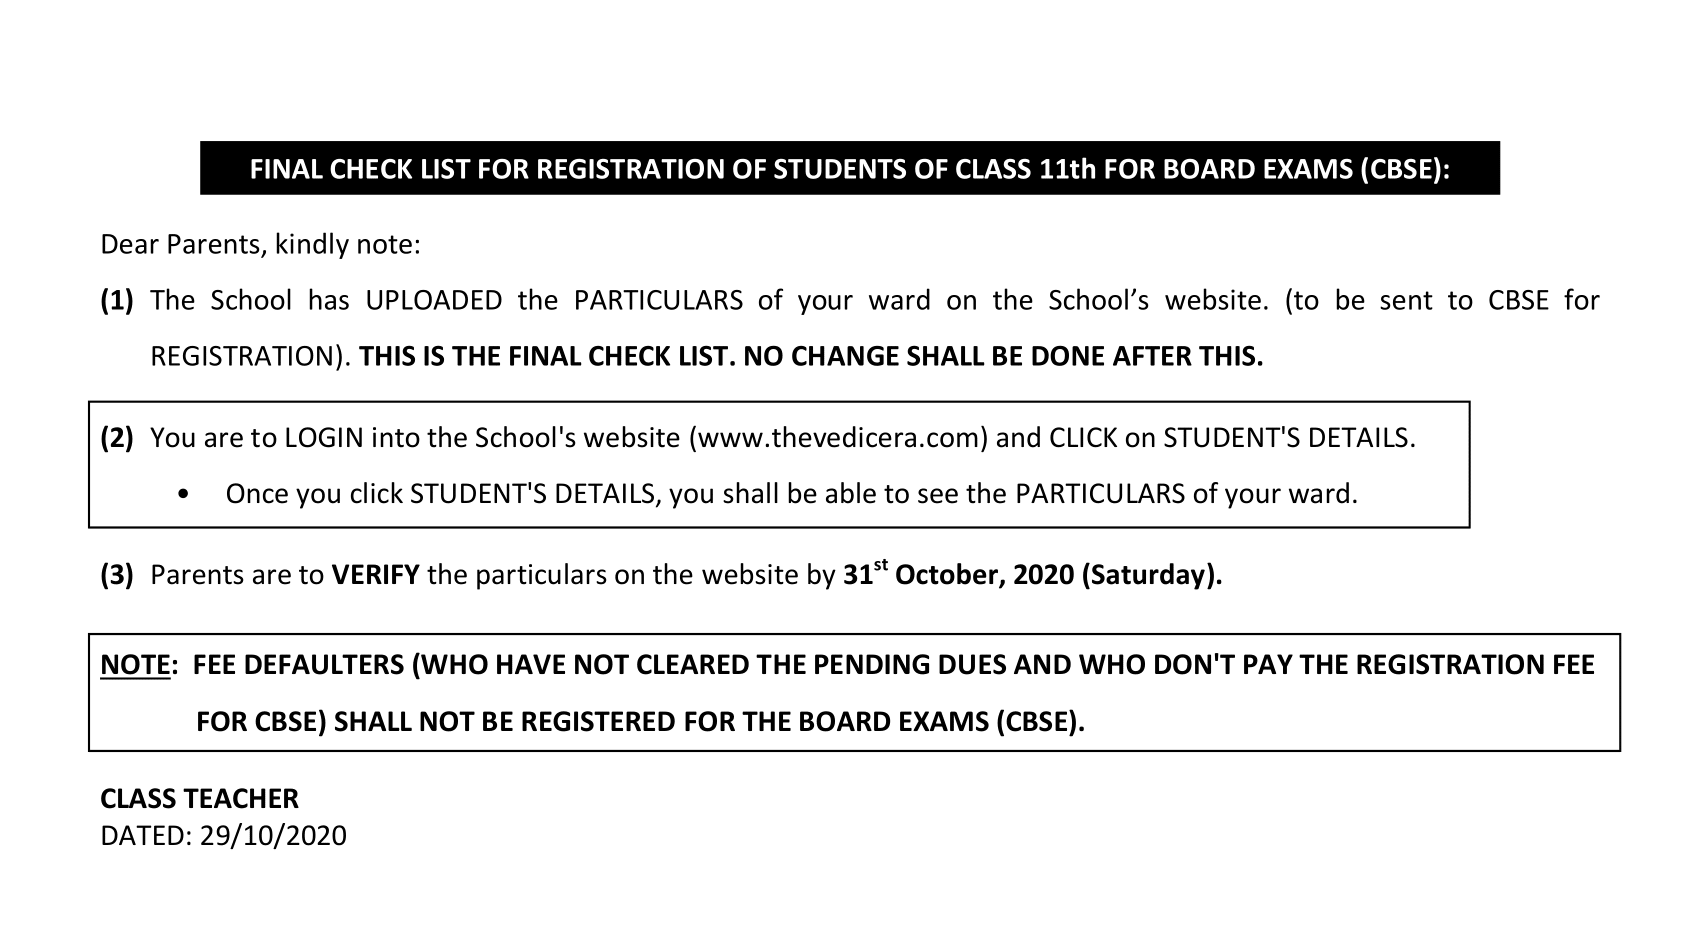 REGISTRATION OF STUDENTS OF CLASS 11th IN CBSE